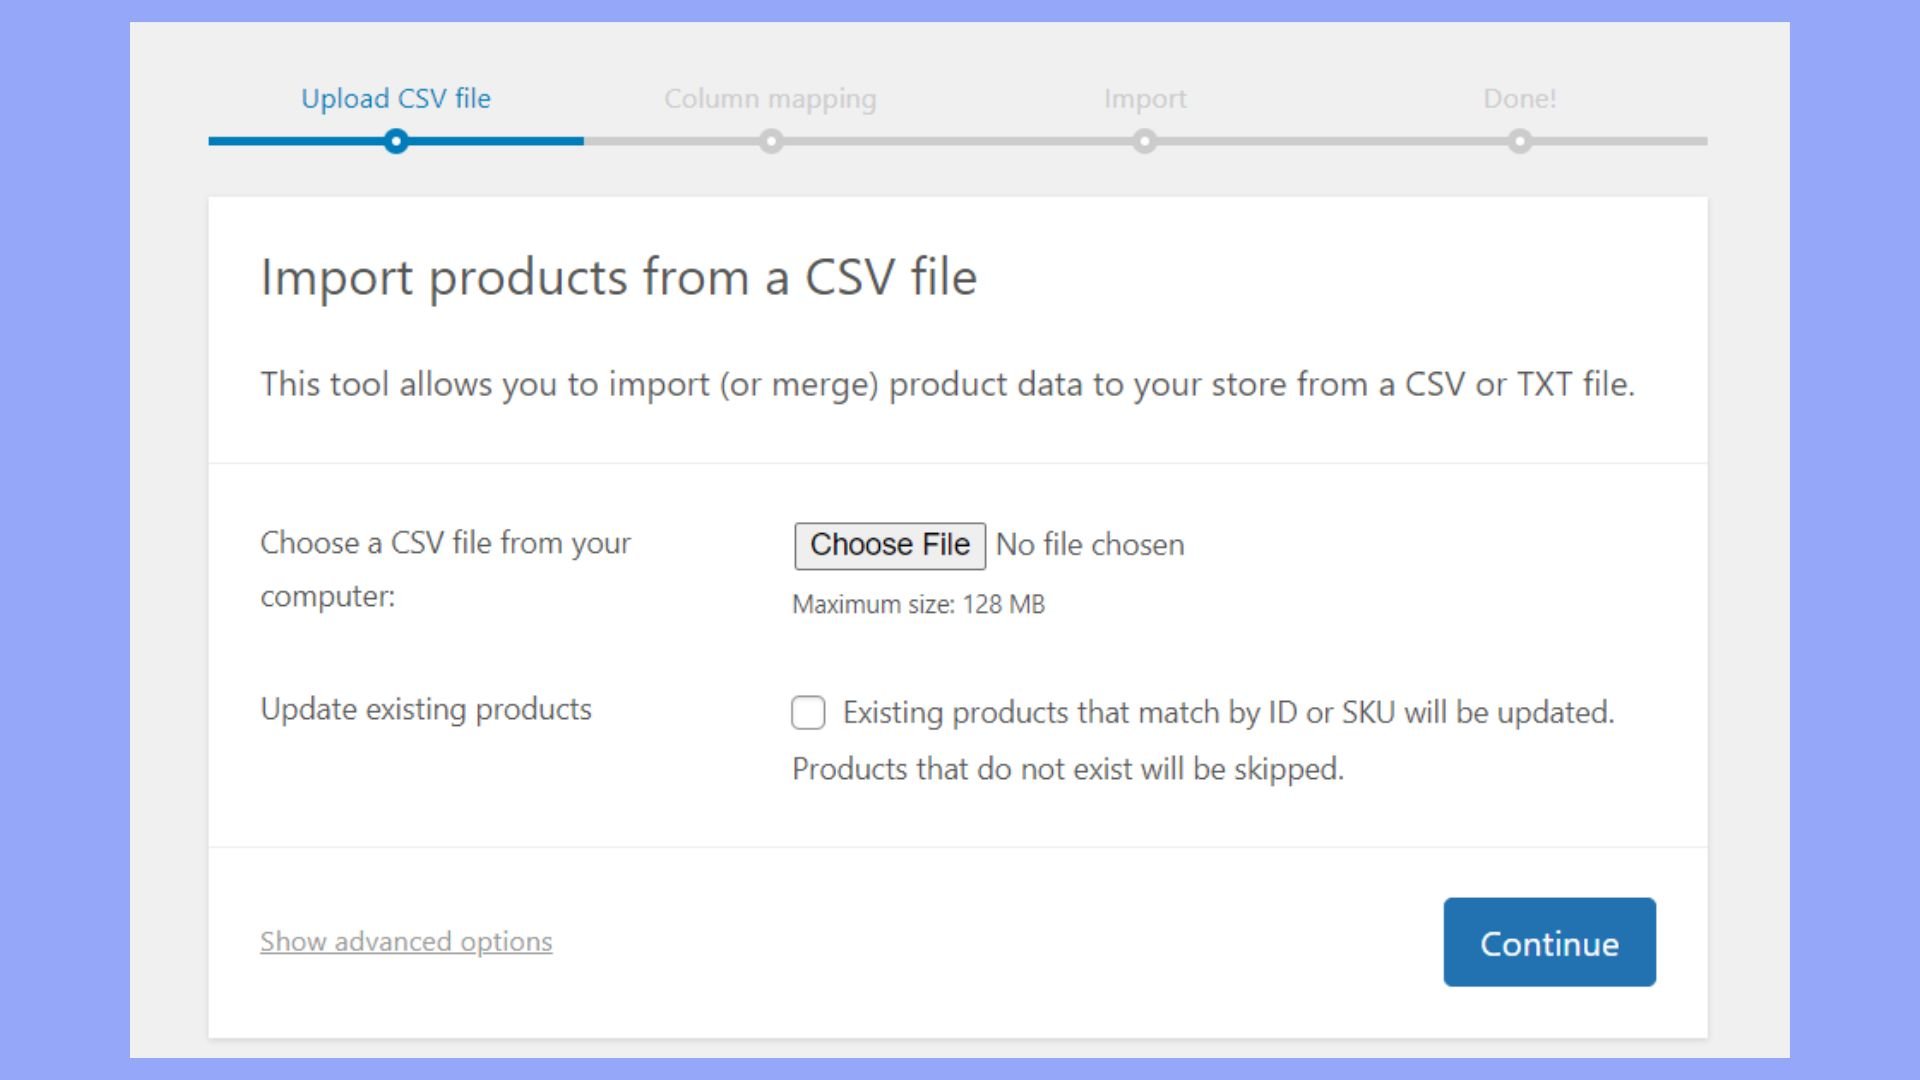 Upload your CSV file and click Continue to proceed with uploading your products to WooCommerce.